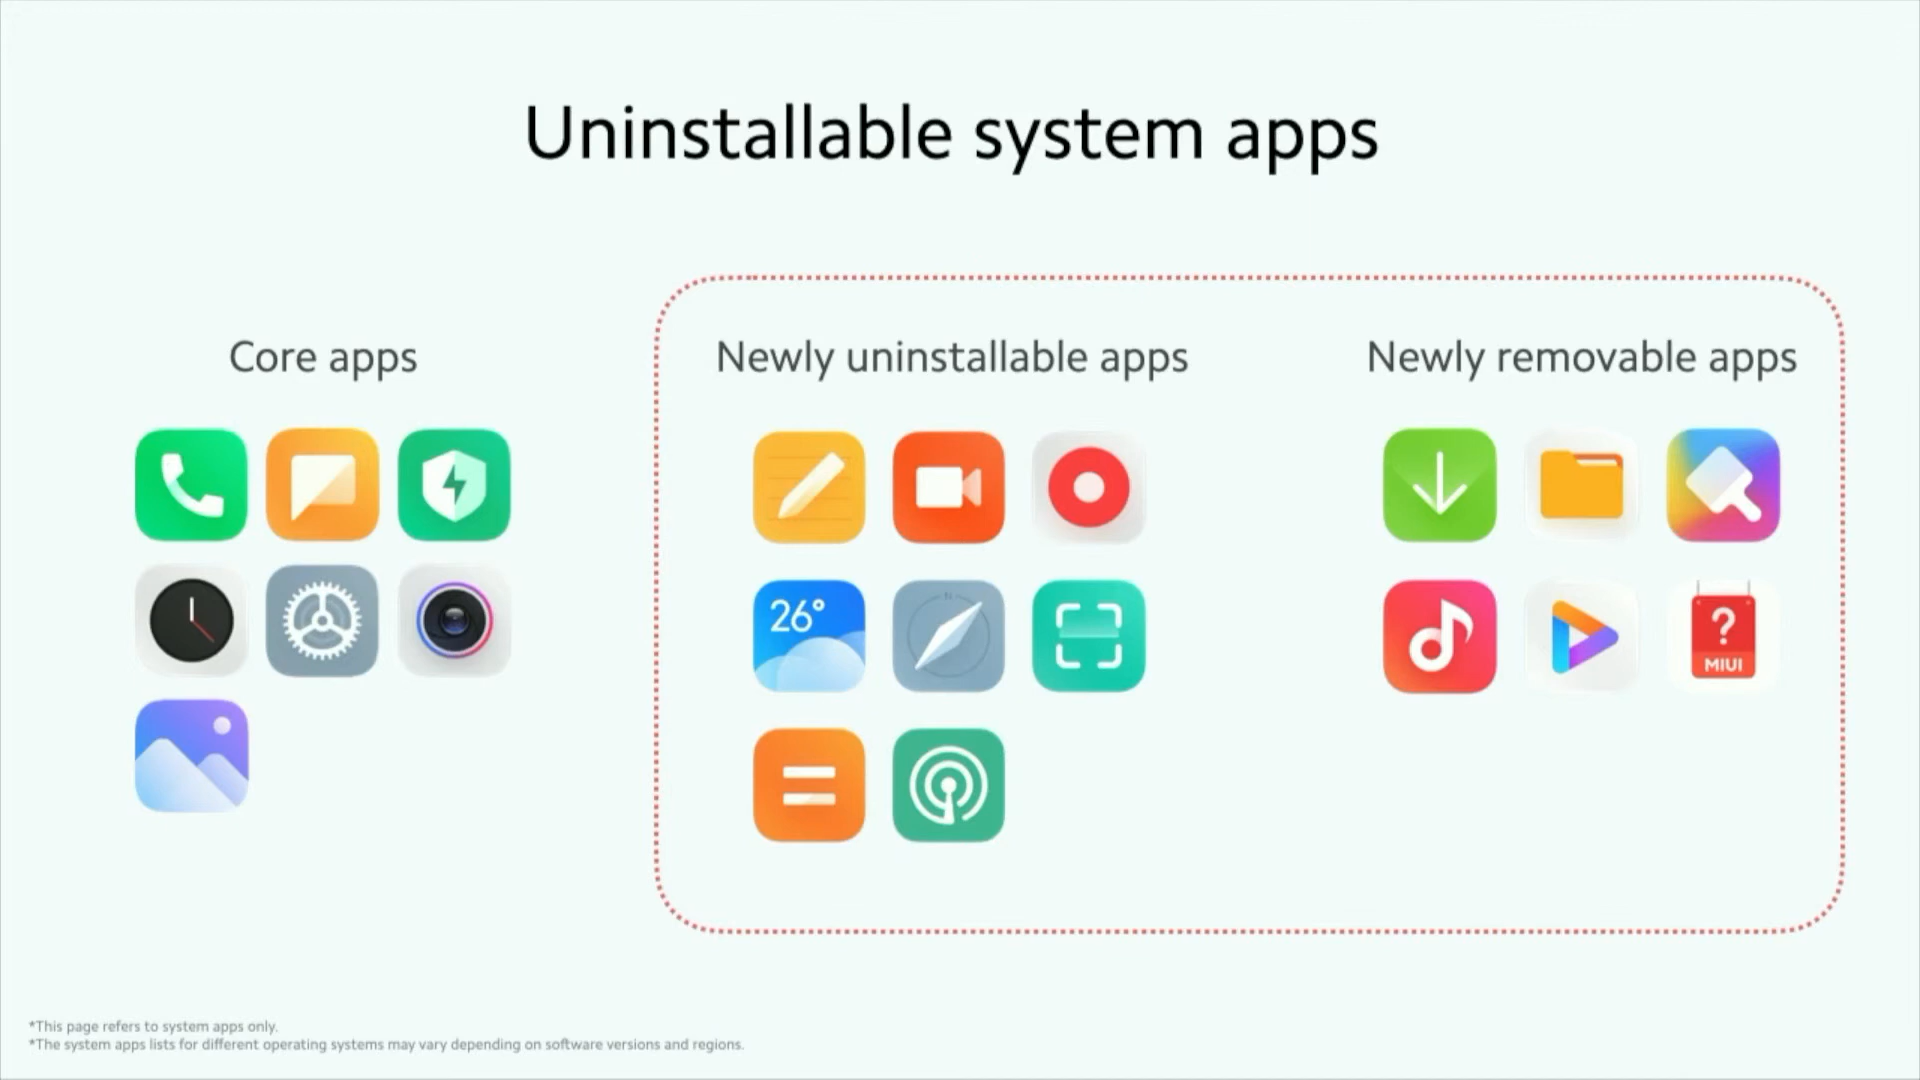 How To Uninstall System / Built-in Apps On Xiaomi Or Redmi (miui)